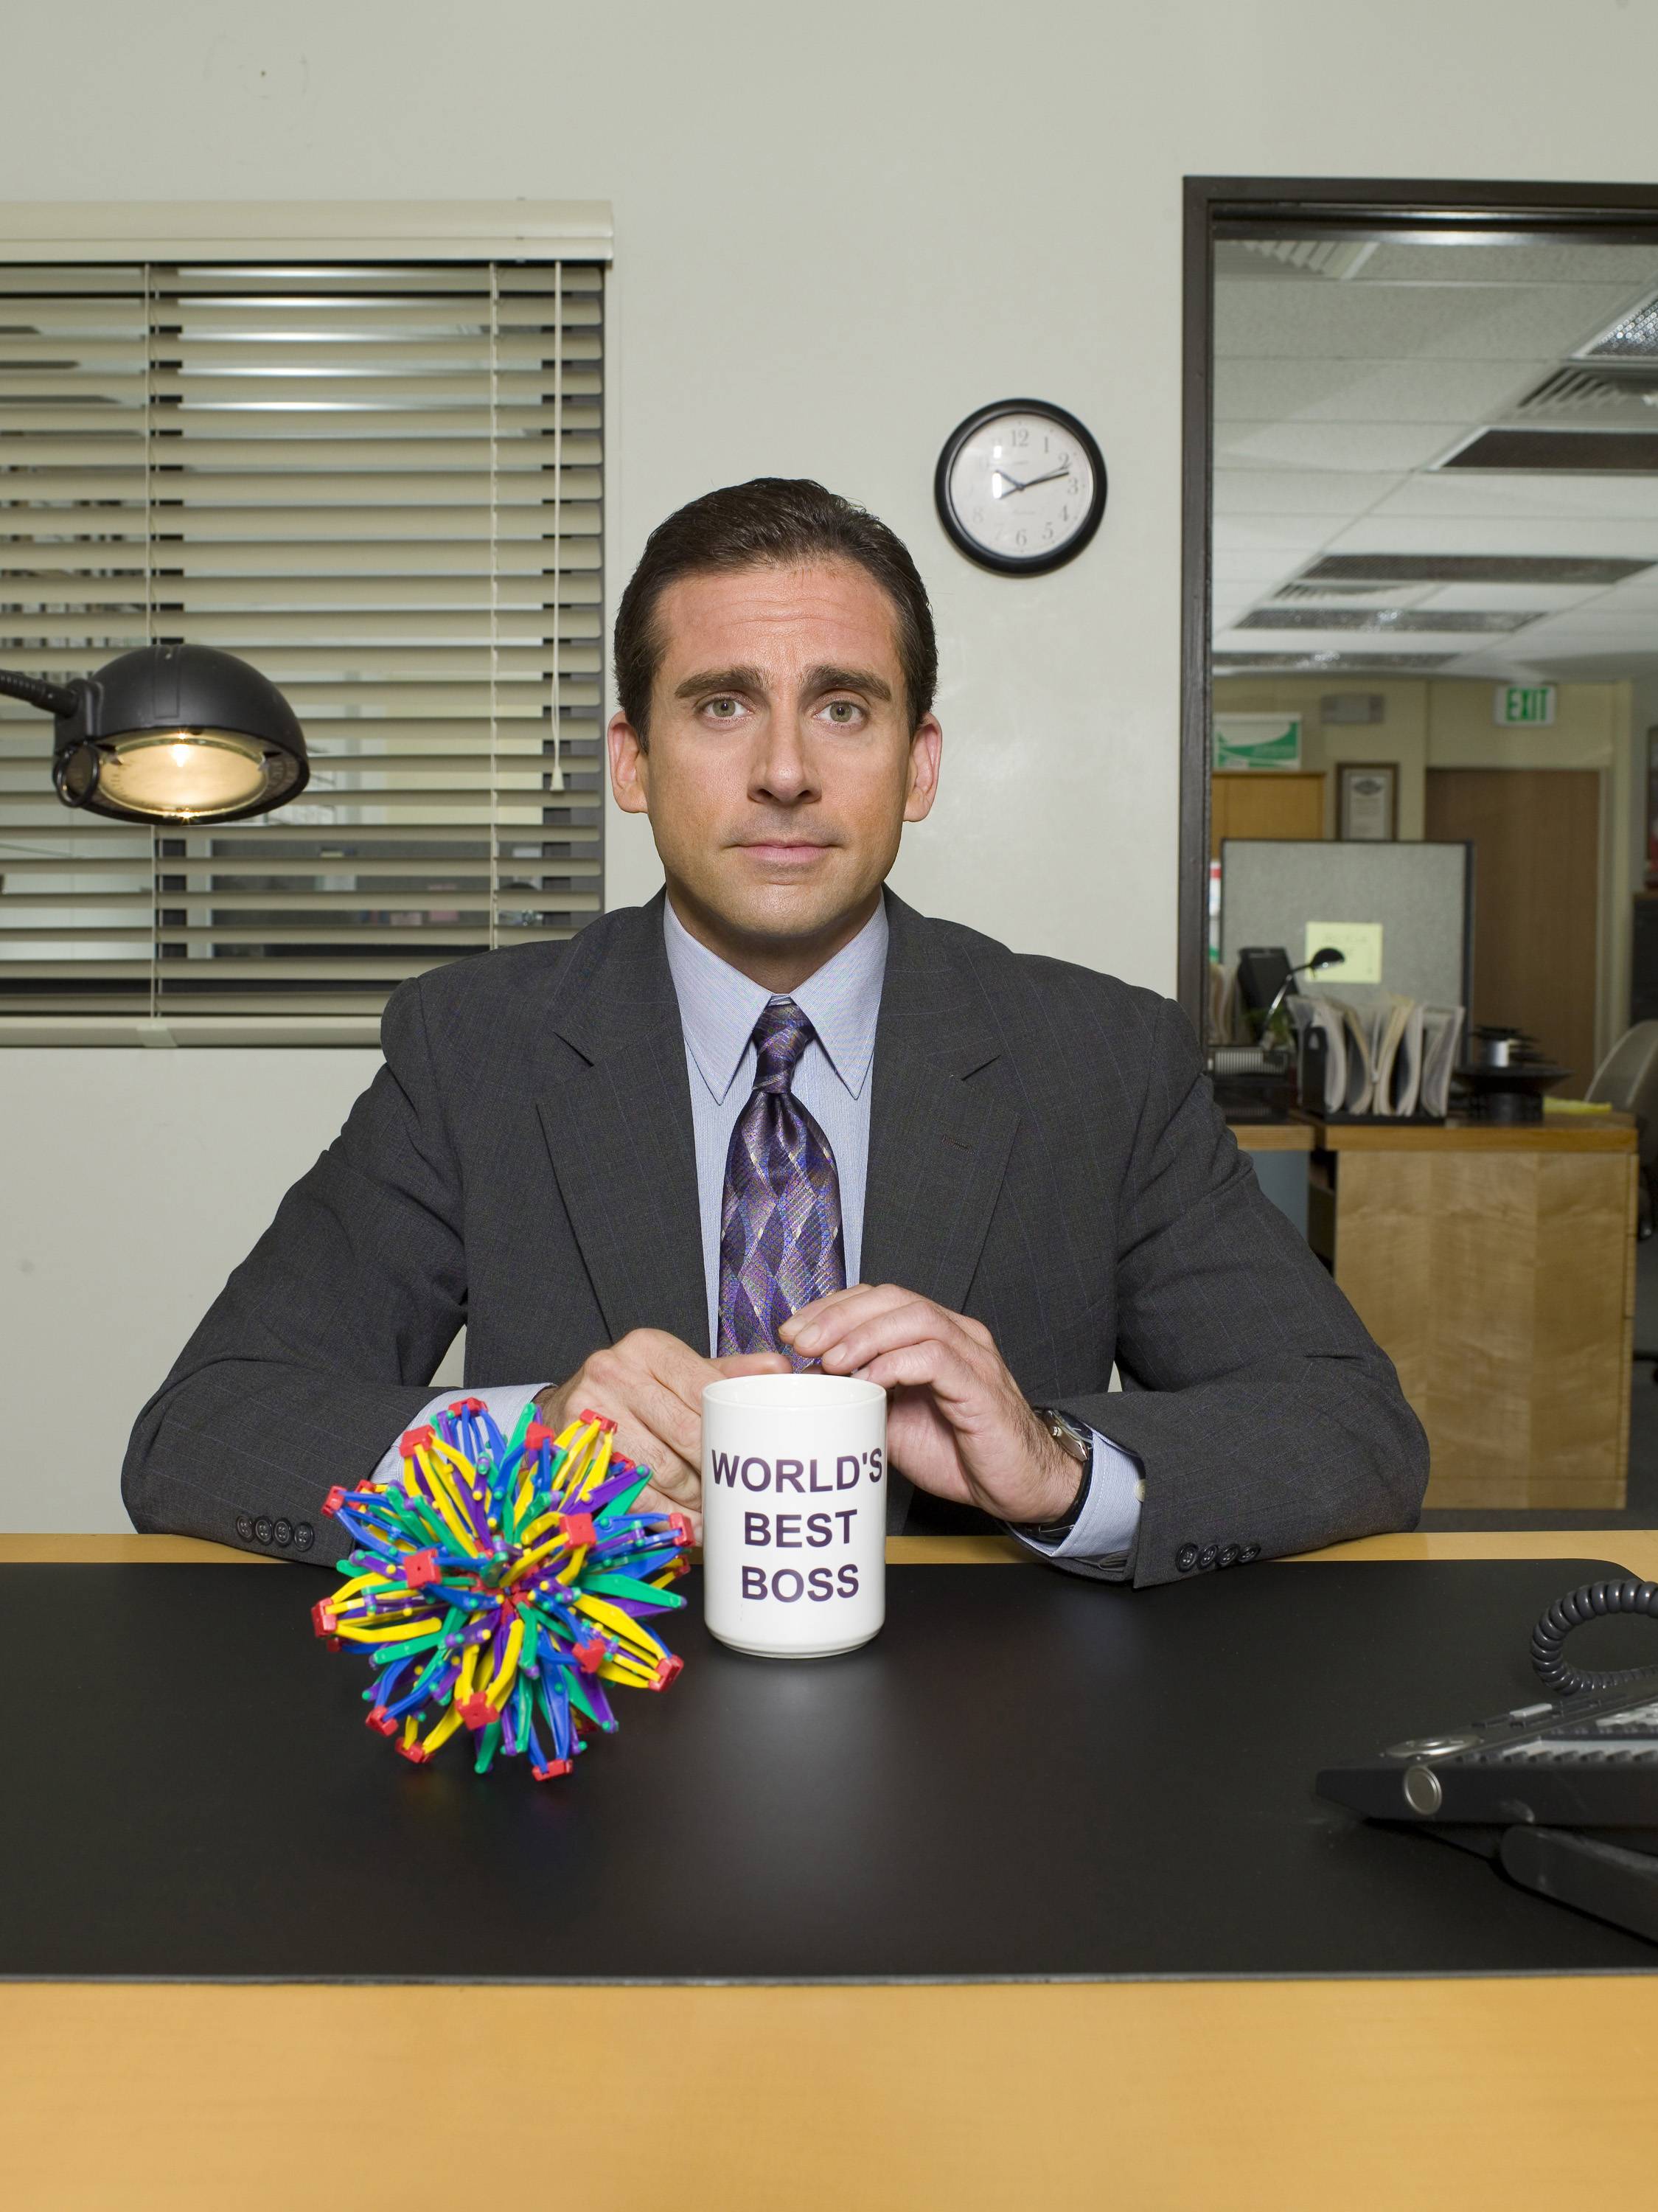 The Office' Reboot: Does The Internet's Favorite Show Need To Be Revived? |  News | MTV